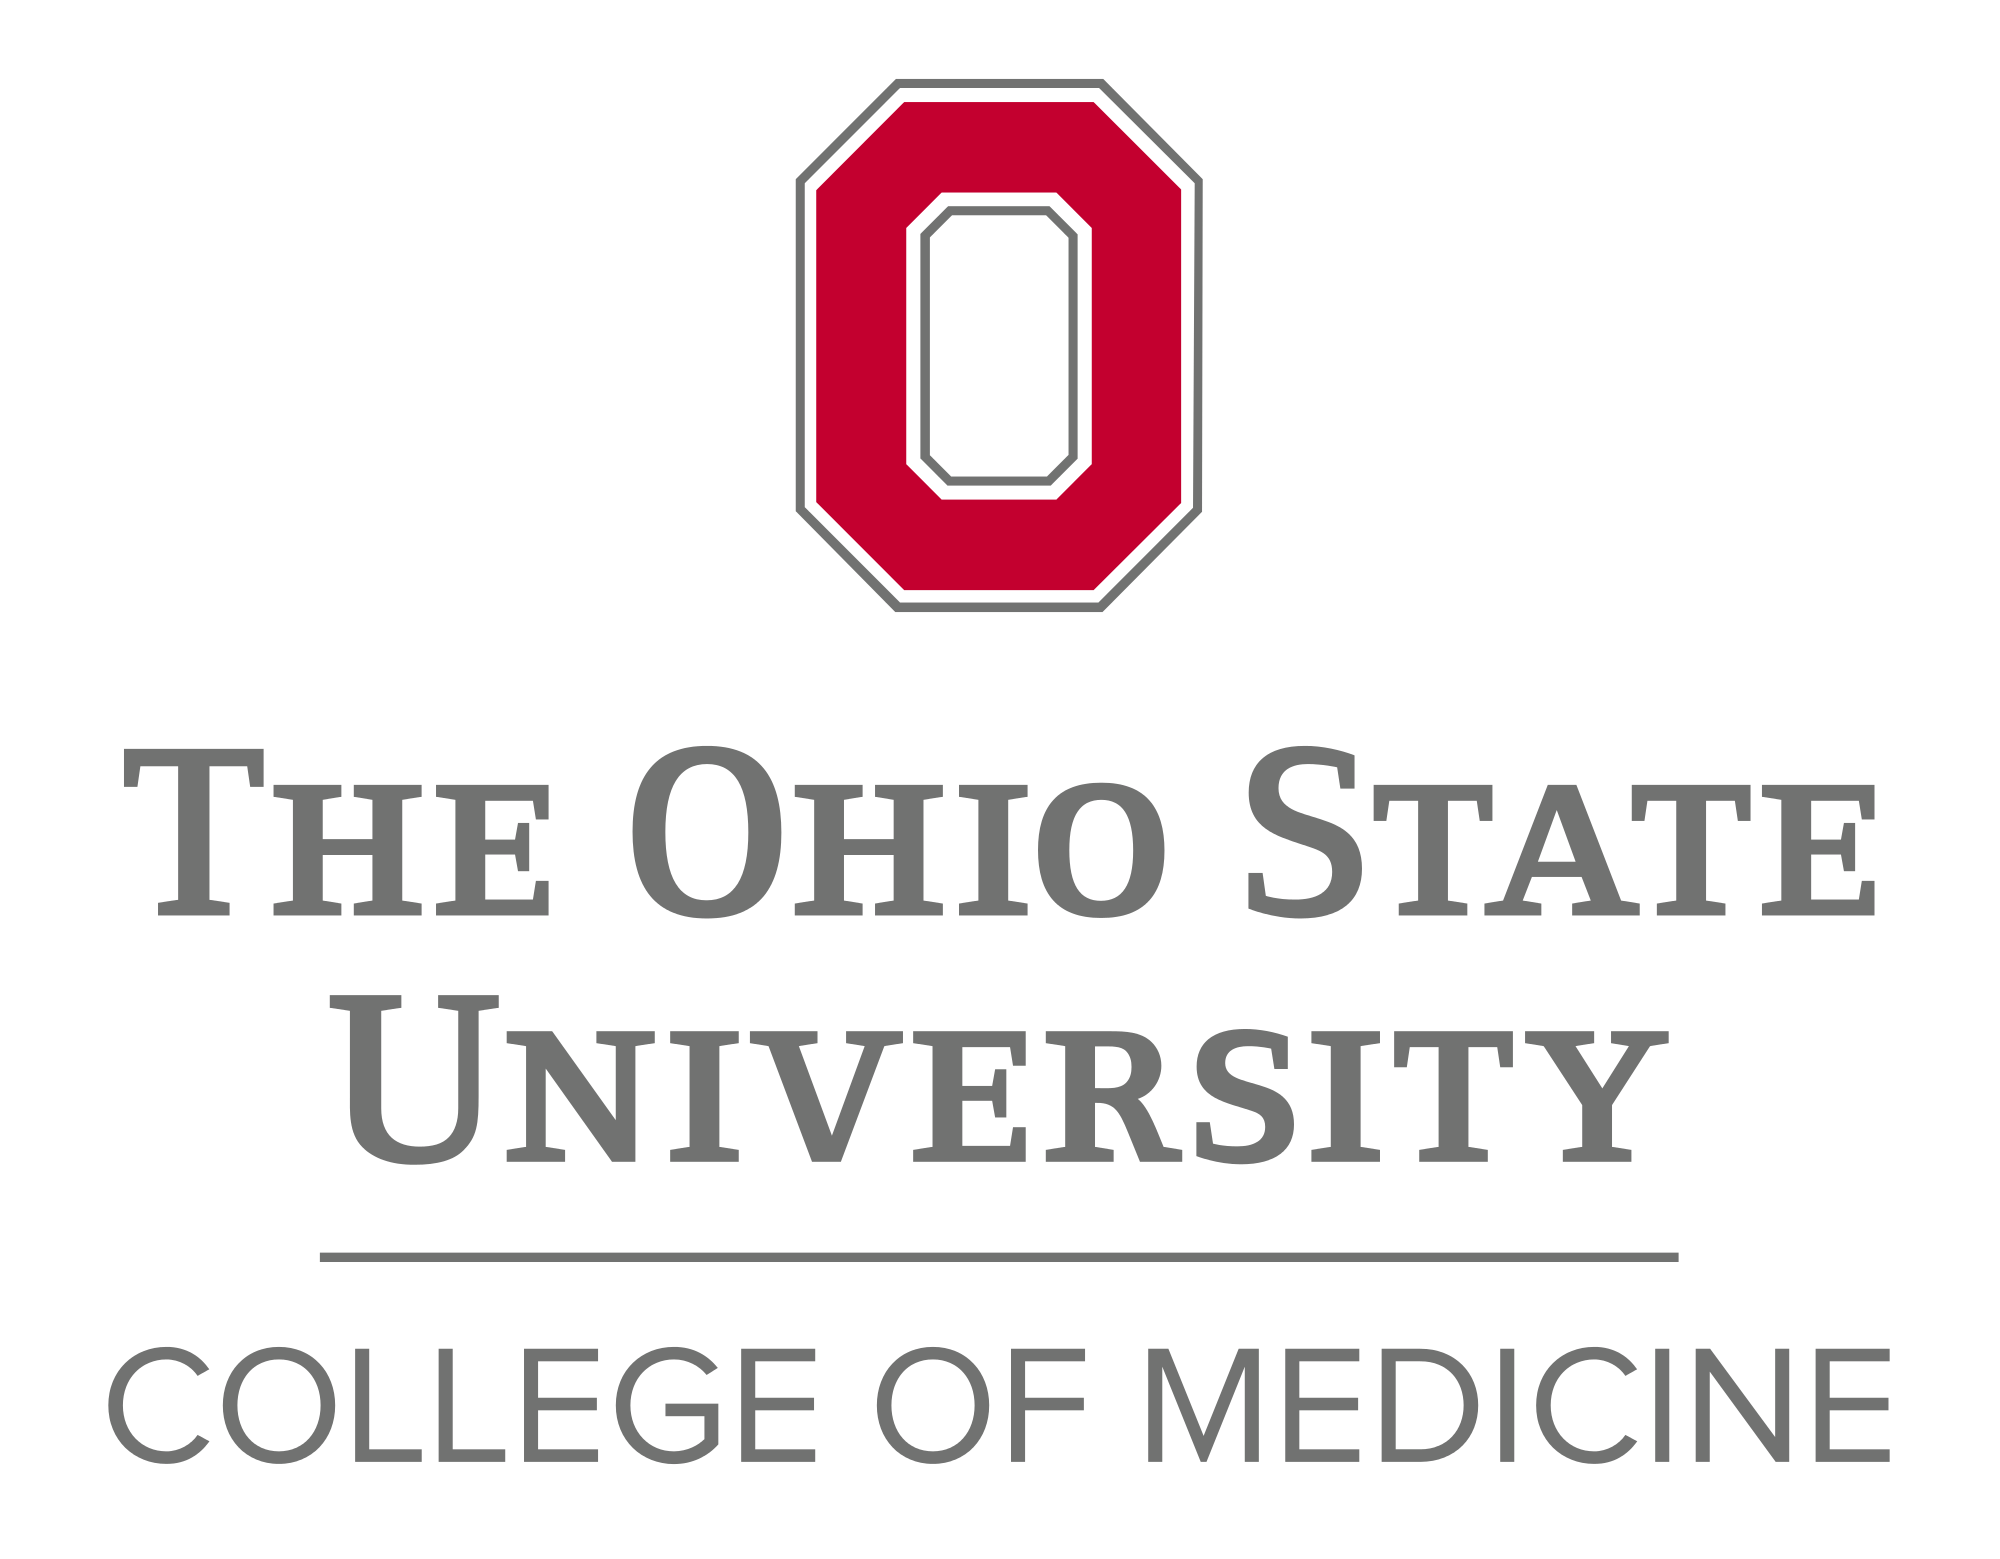 The_ohio_state_university_college_of_medicine.svg.png